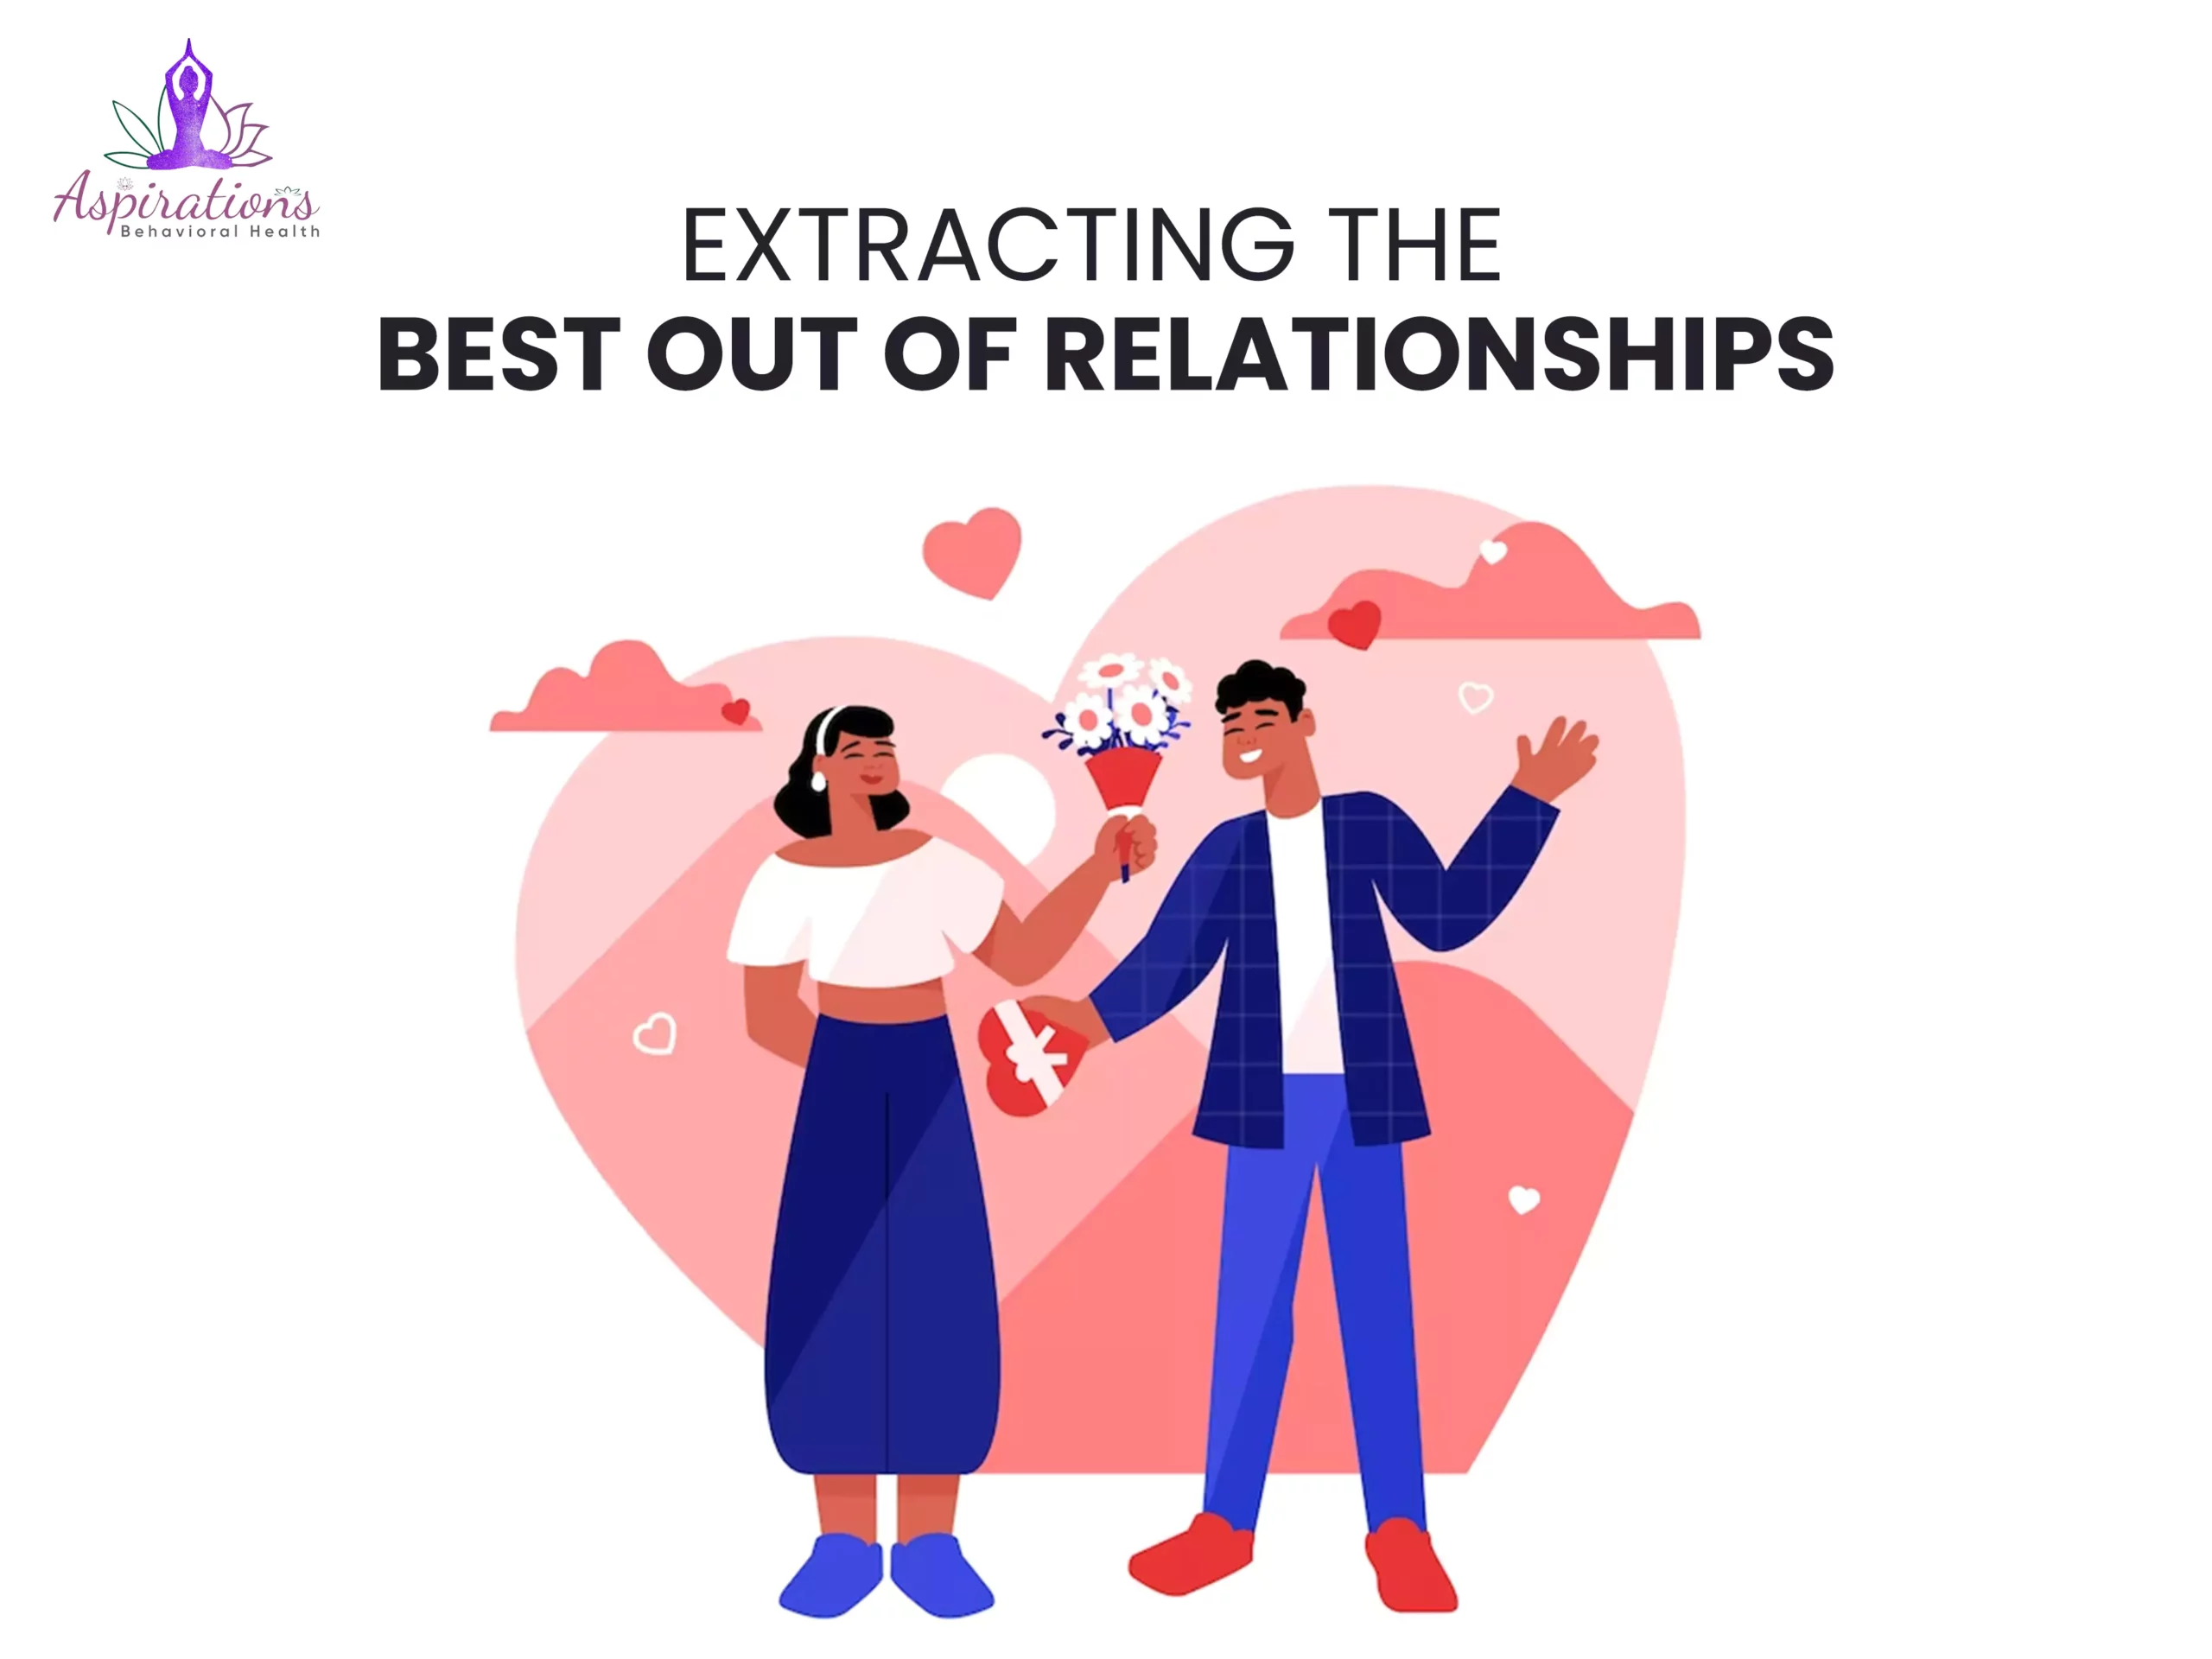 Extracting the Best Out of Relationships